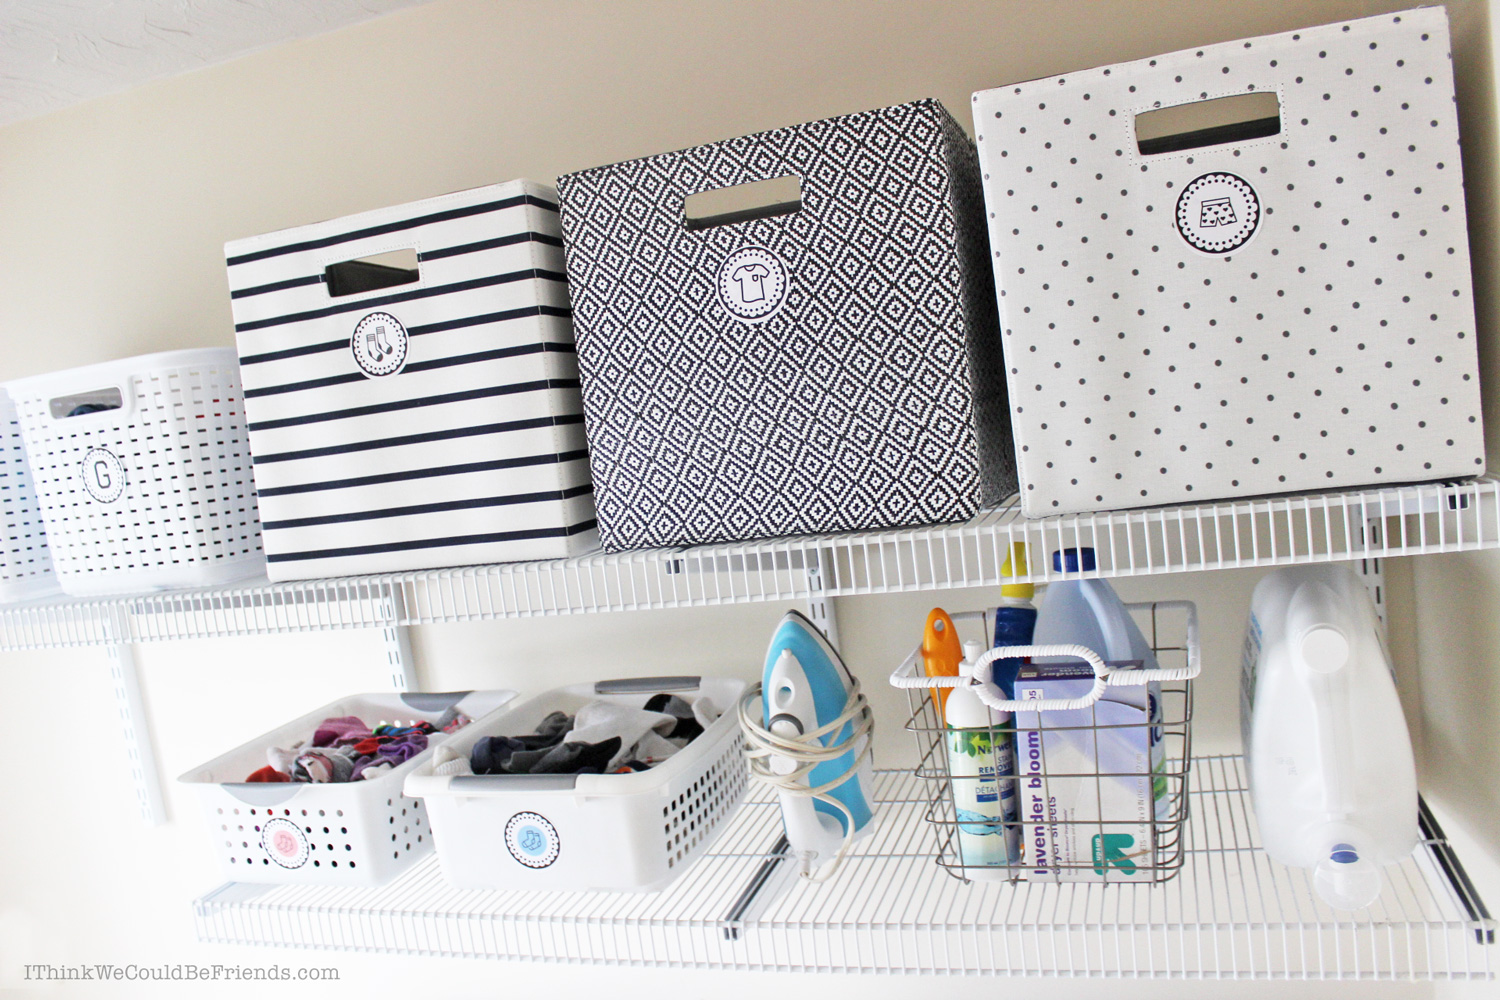 My Laundry System: How I literally cut the time it takes me to do laundry from start to finish IN HALF with 3 simple steps!! (and why I got rid of ALL of our laundry baskets!) #laundry #room #system #organization #tips #hacks #save #time